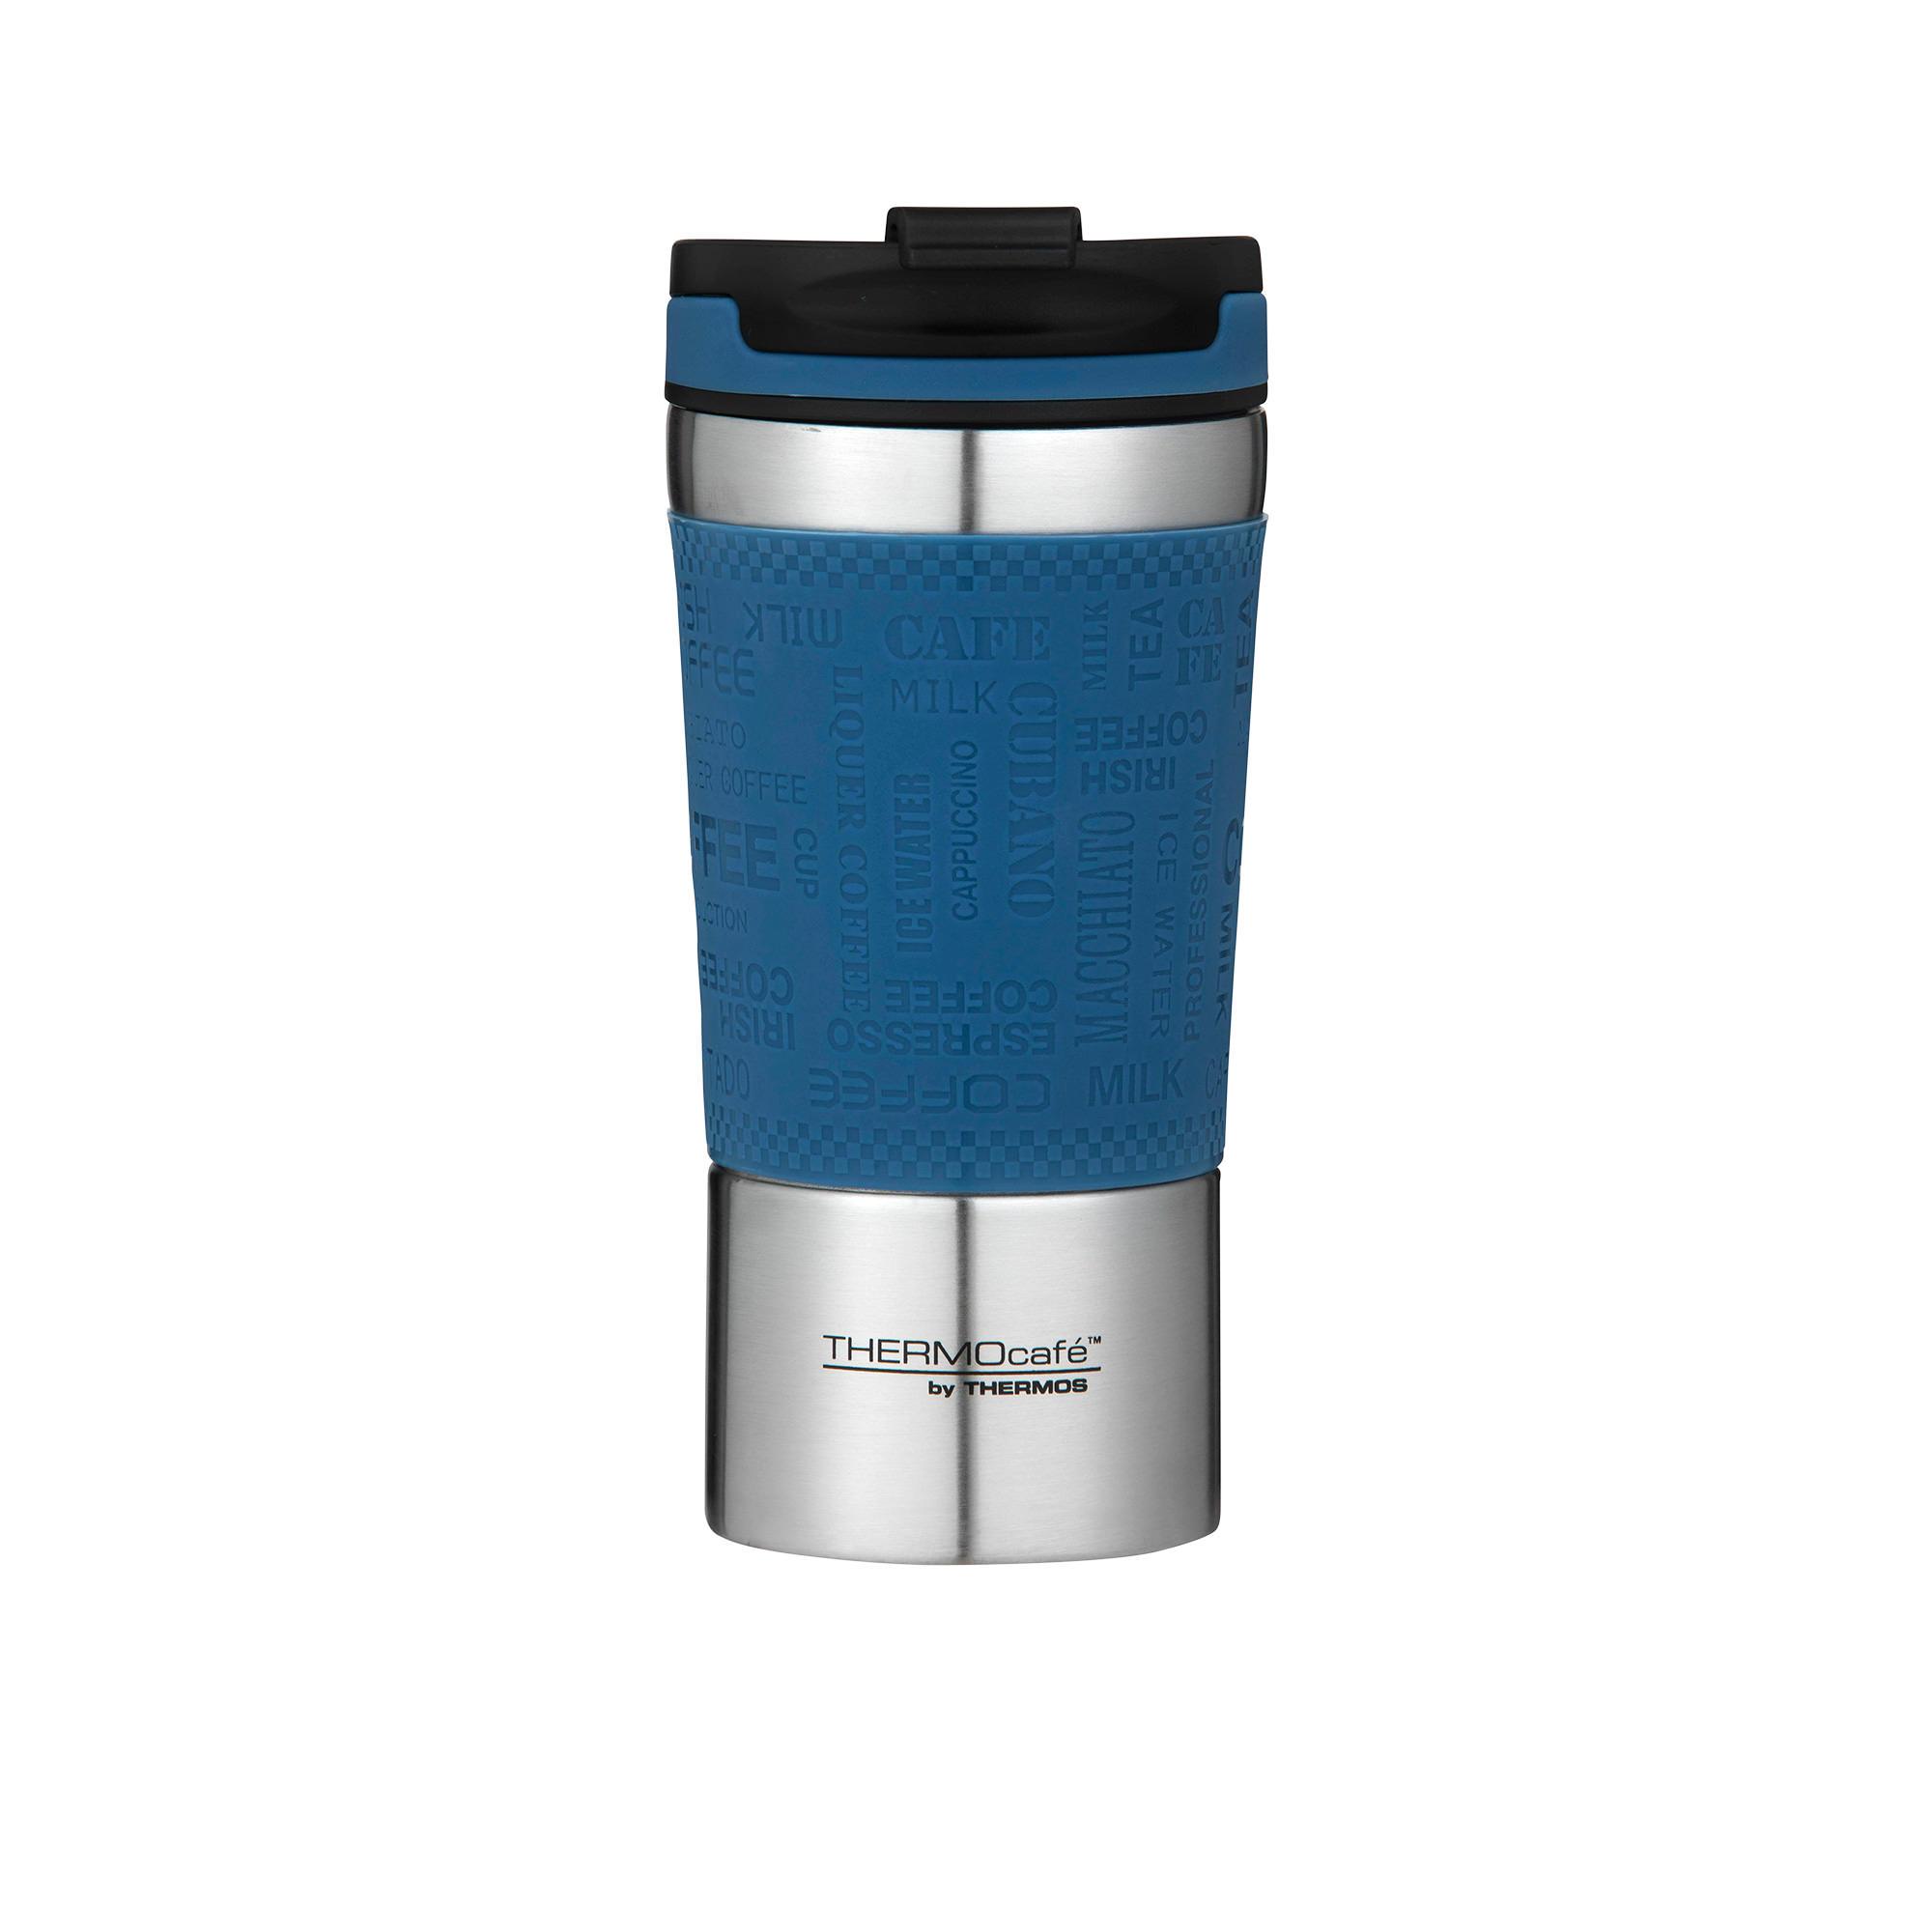 Thermos Thermocafe Insulated Travel Cup 350ml Dark Blue Image 1